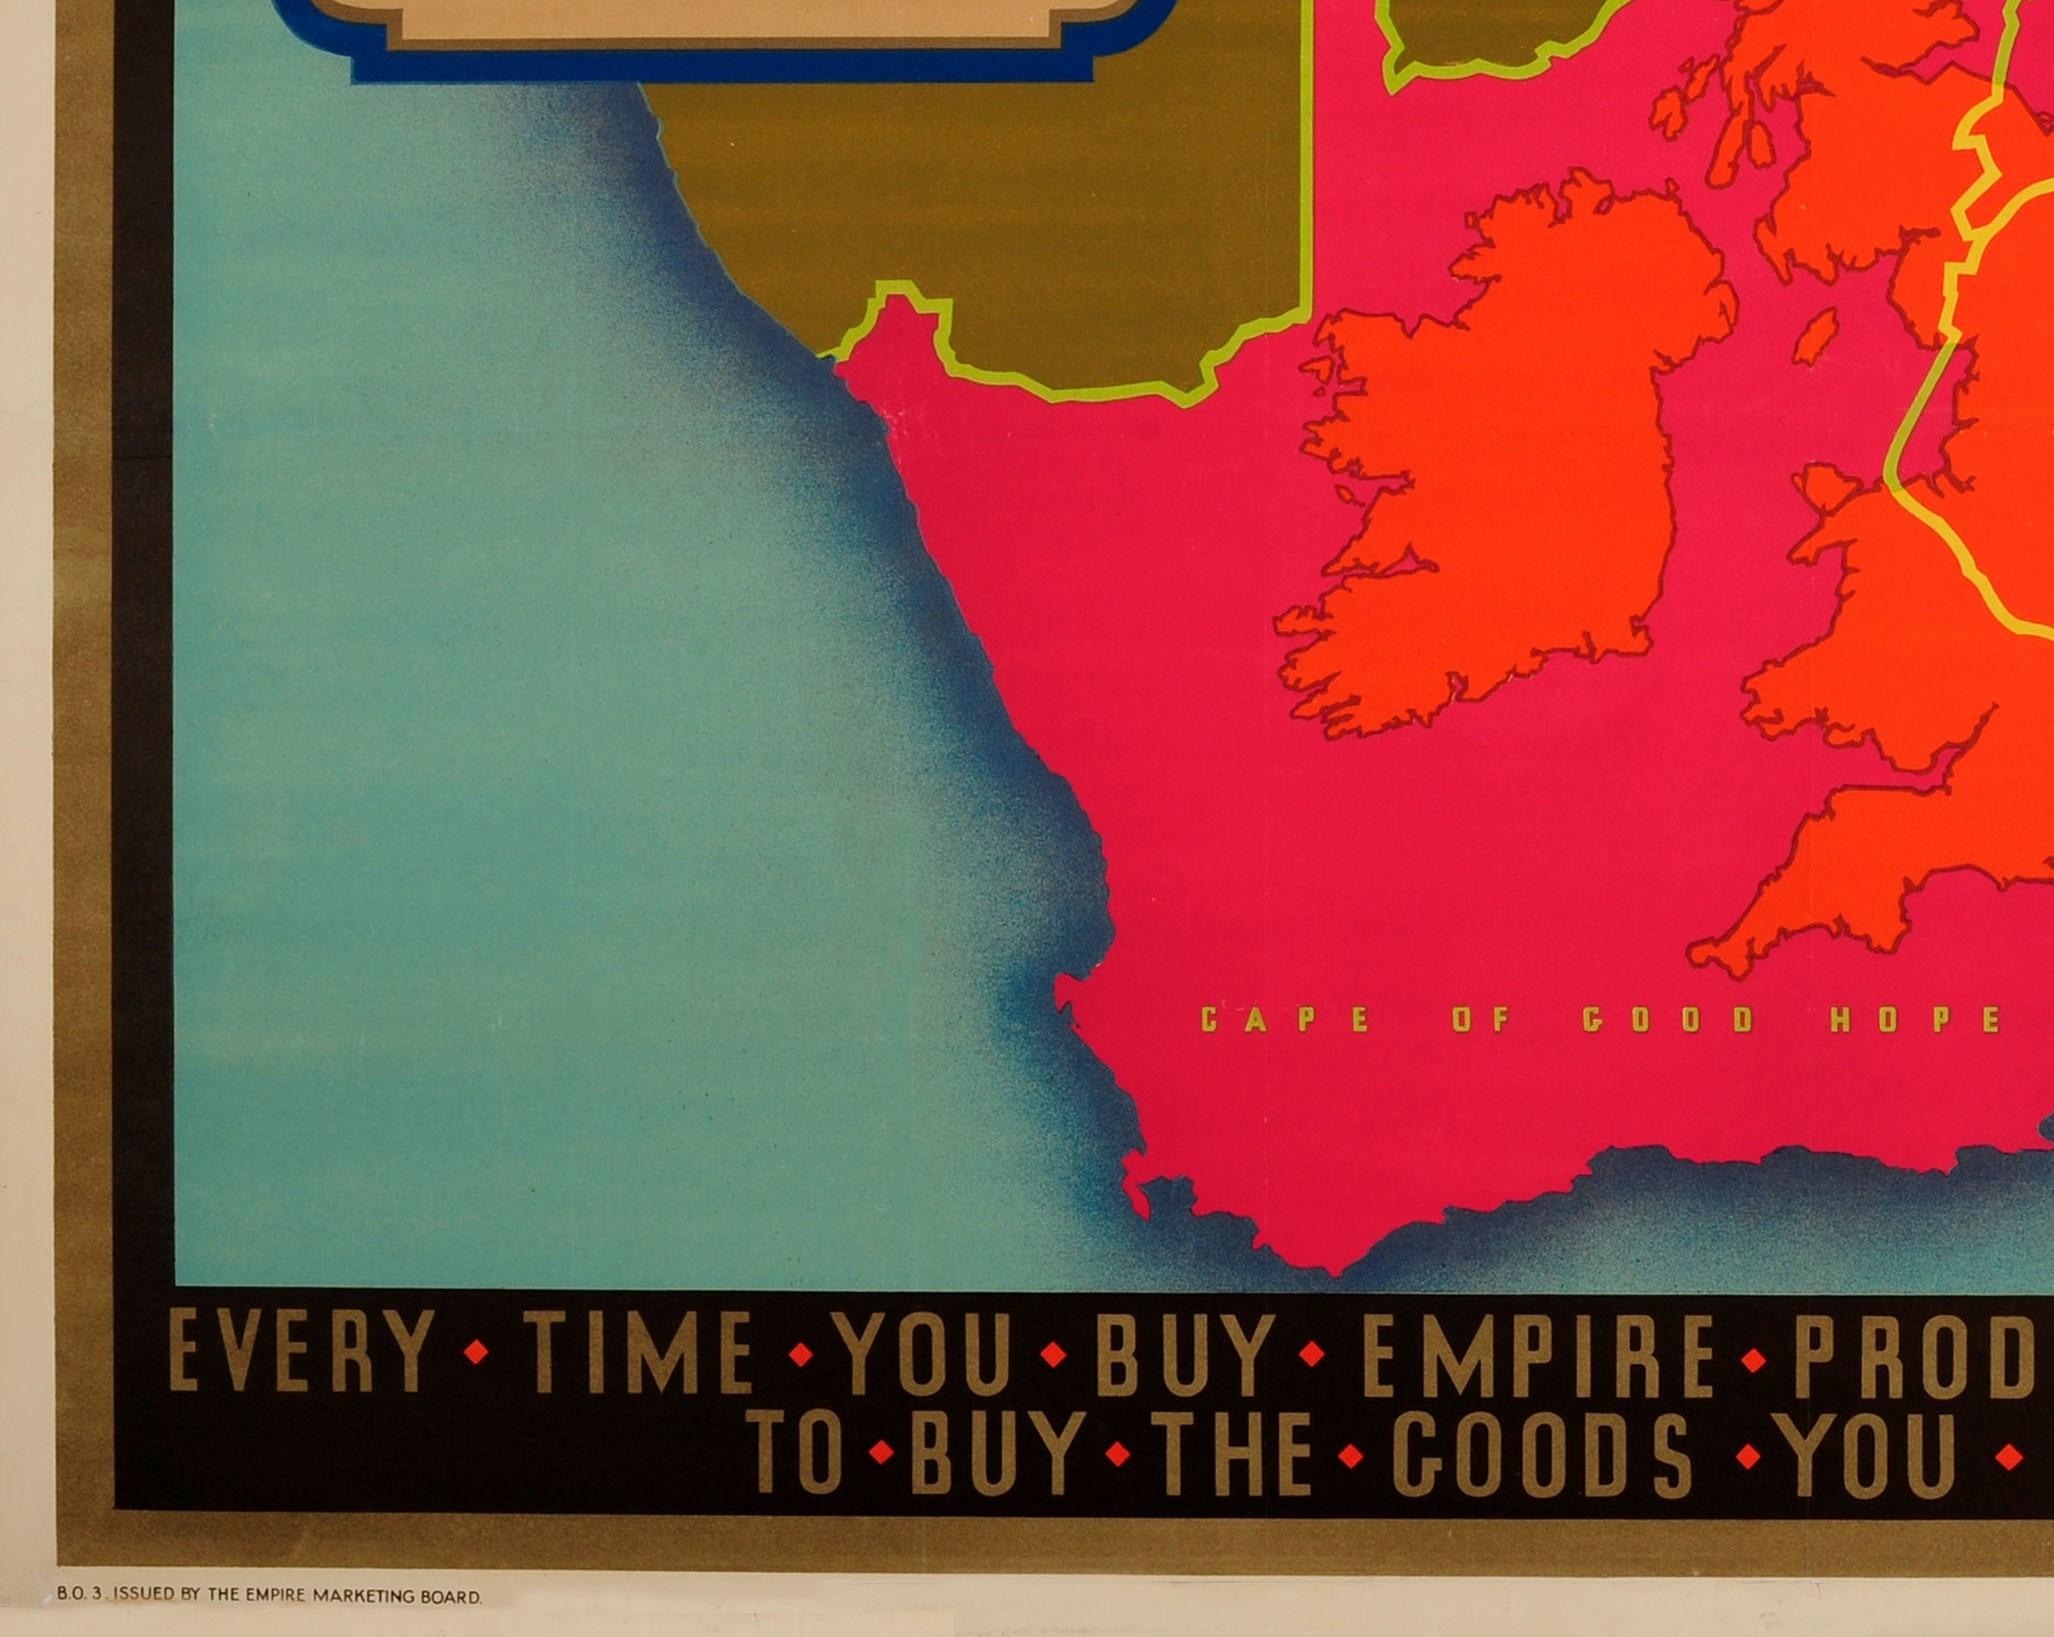 Originales historisches Plakat des Empire Marketing Board - Every Time You Buy Empire Produce You Help The Empire To Buy The Goods You Make At Home - herausgegeben vom Empire Marketing Board (EMB 1926-1933; gegründet zur Förderung des Handels